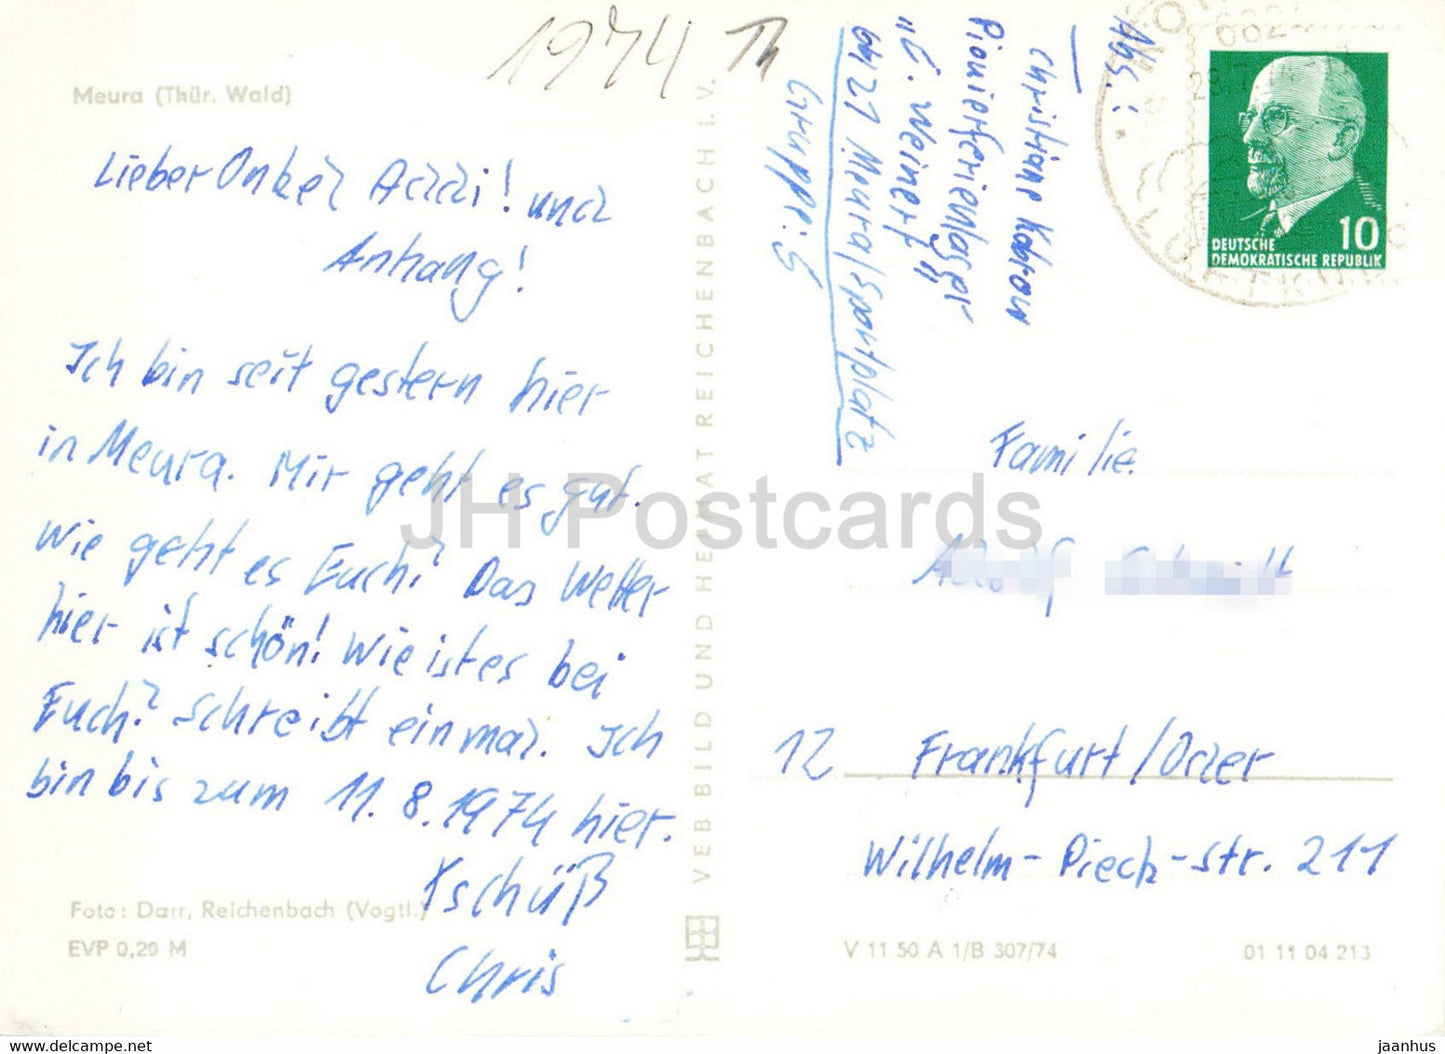 Meura - Thur Wald - old postcard - 1974 - Germany DDR - used